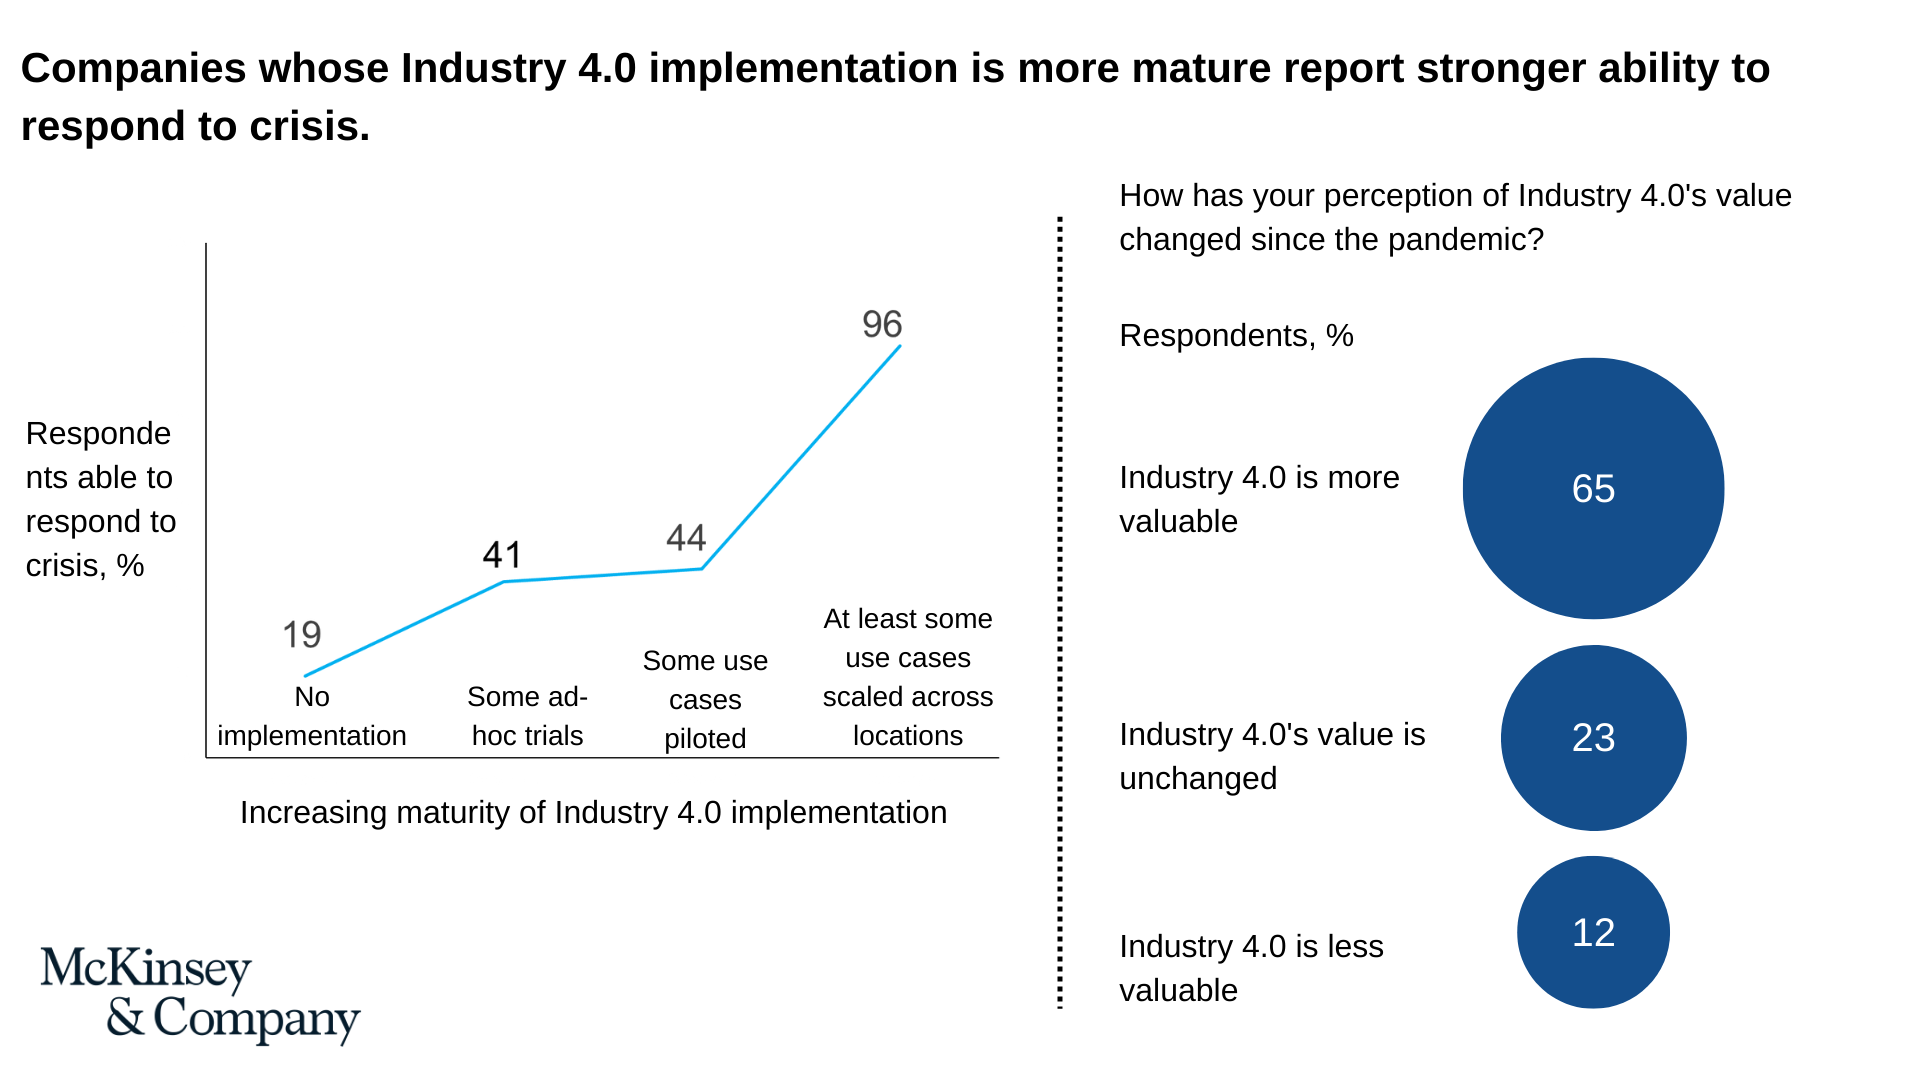 According to a McKinsey survey, 96% of companies that implemented Industry 4.0 prior to COVID-19 were better positioned to respond to the crisis